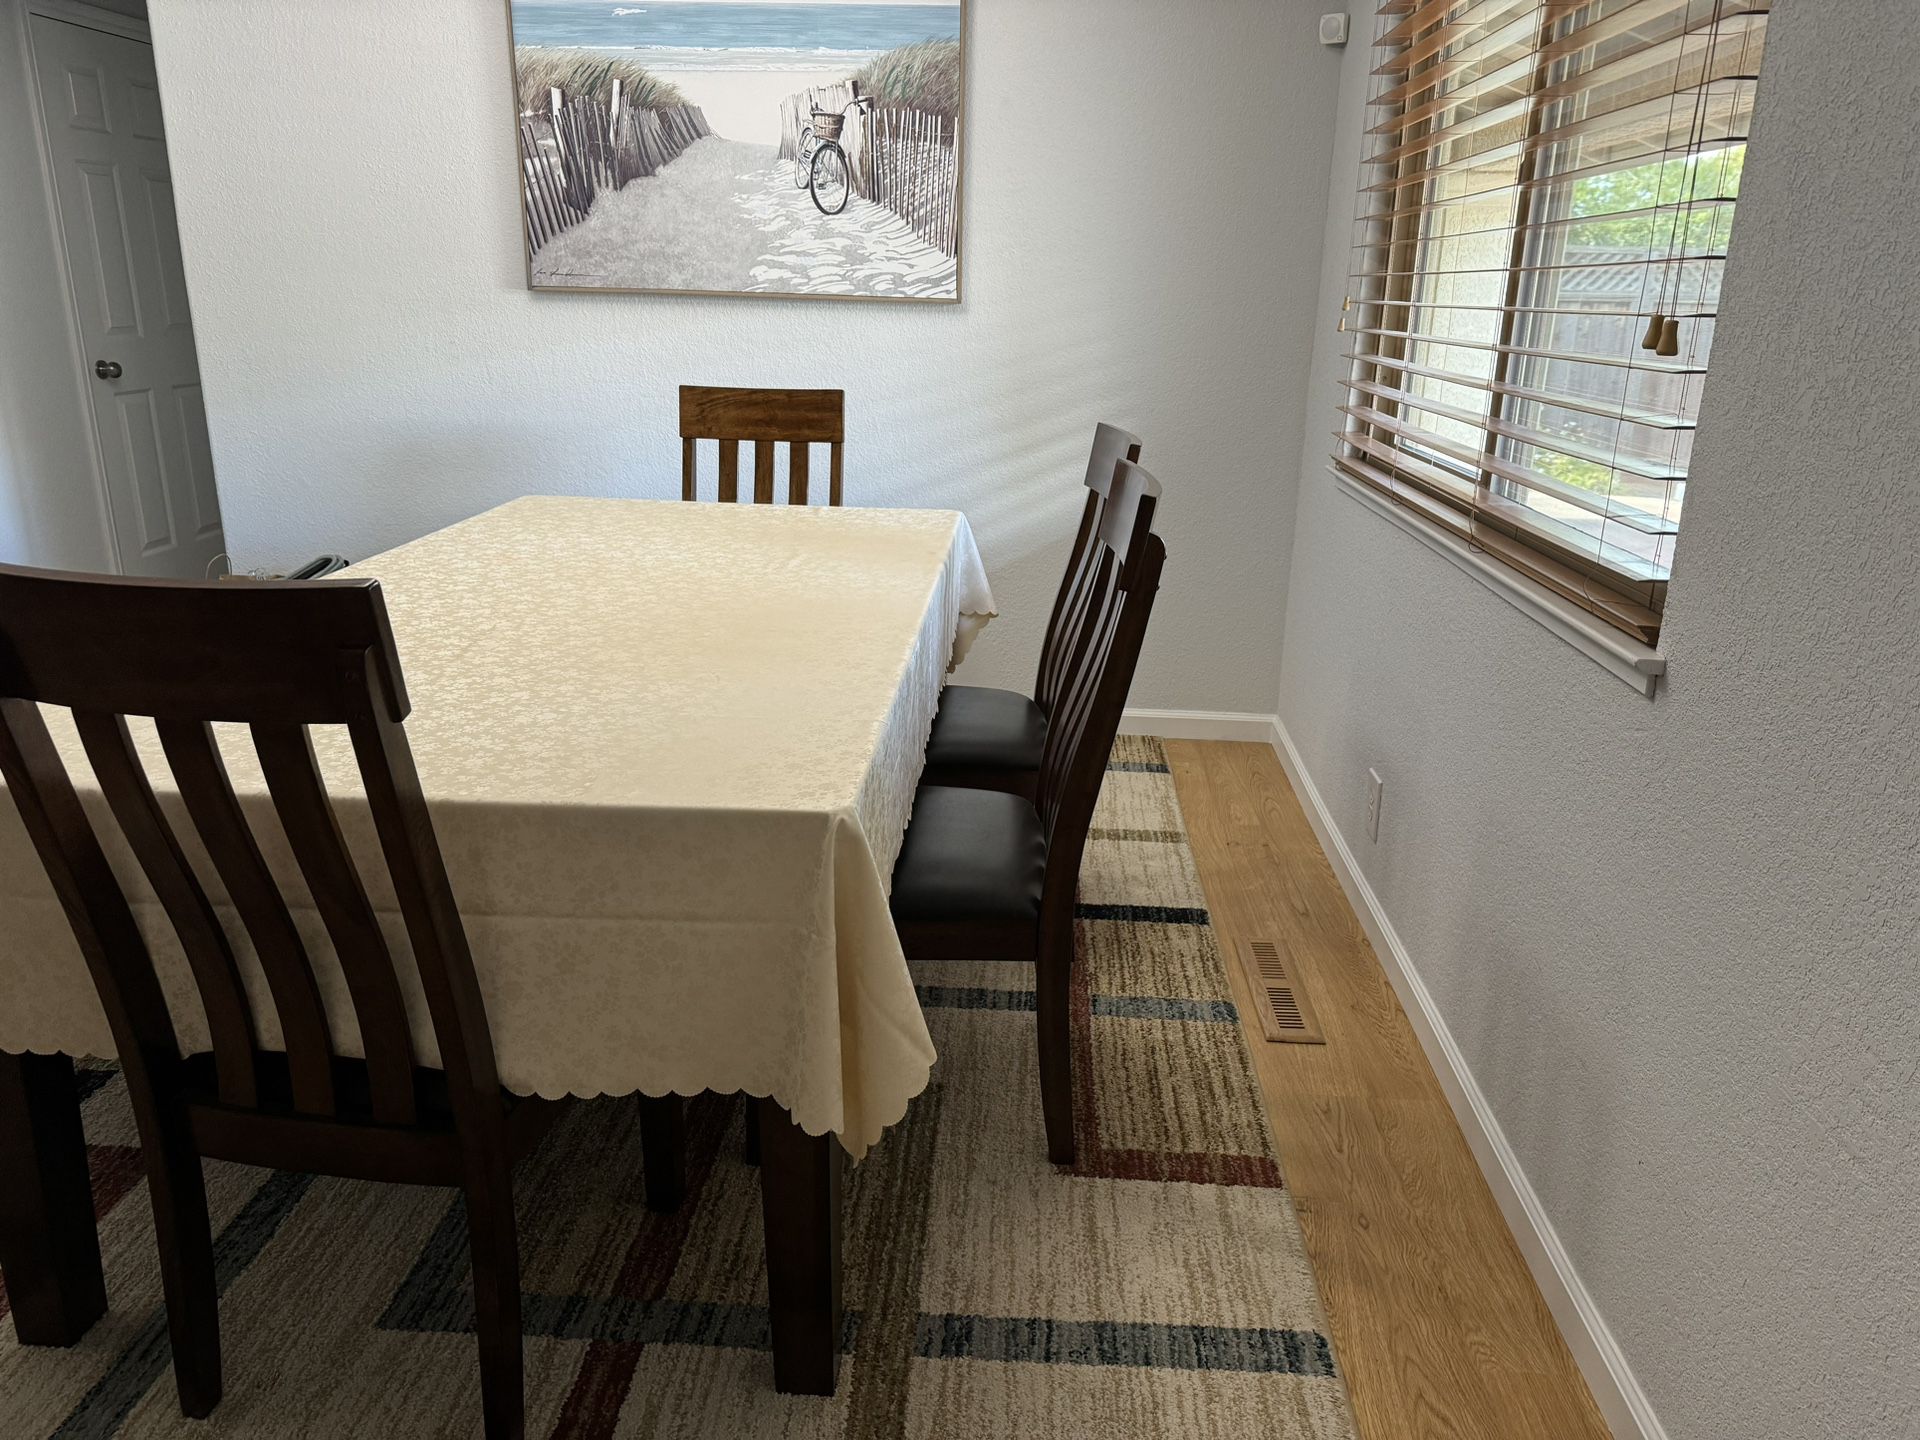 Dining table set with extension 450$ (from living space)